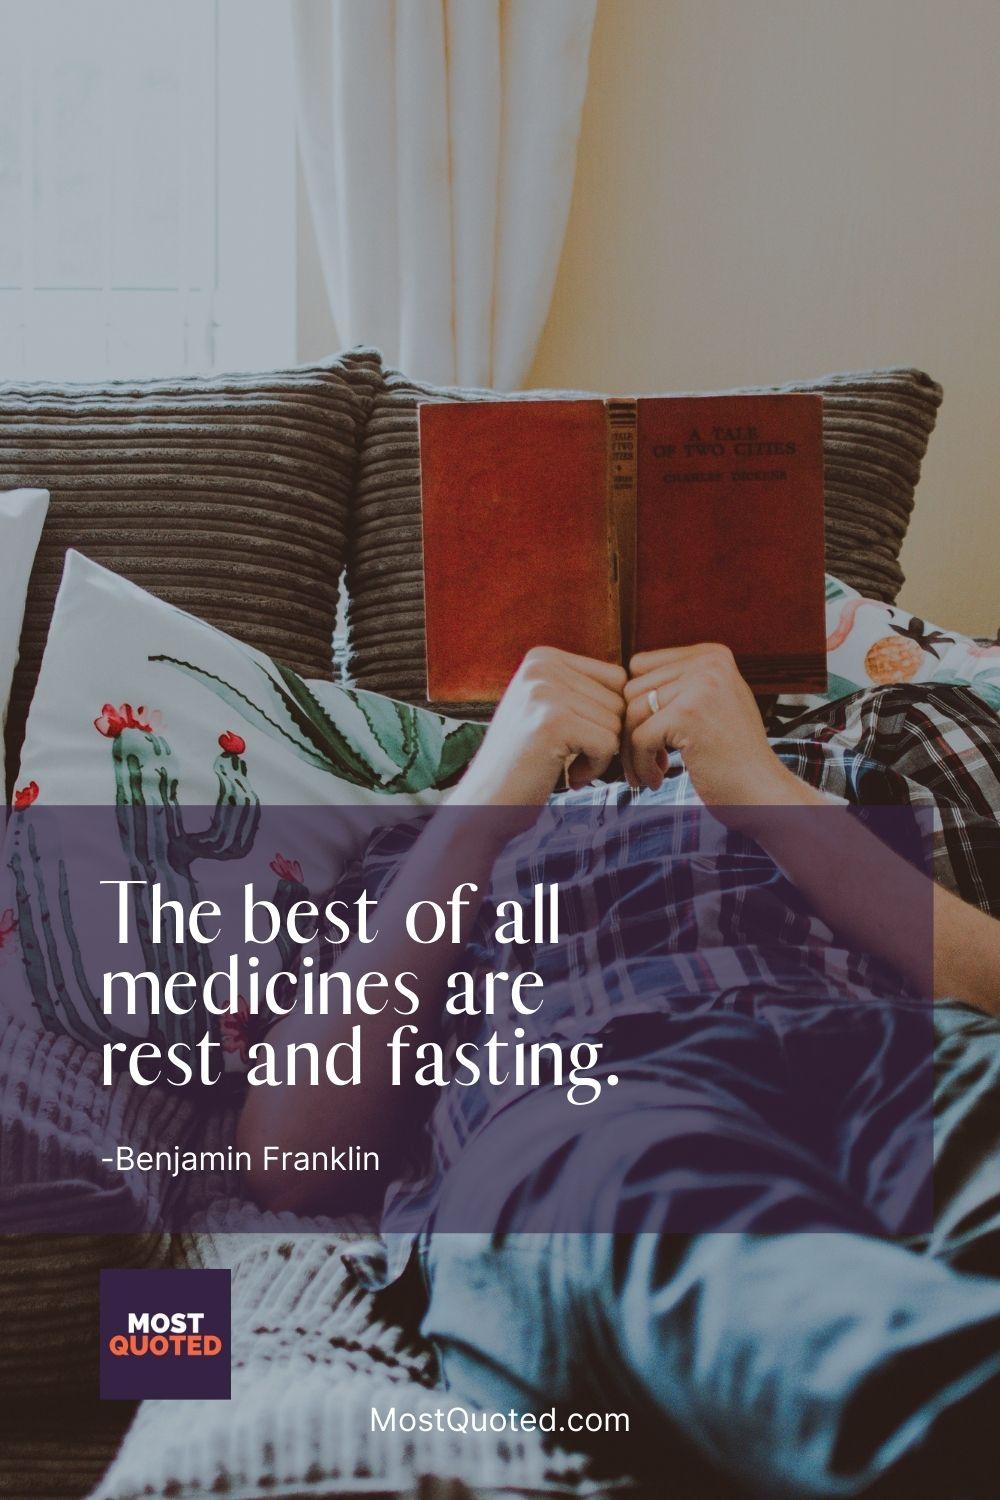 The best of all medicines are rest and fasting. - Benjamin Franklin